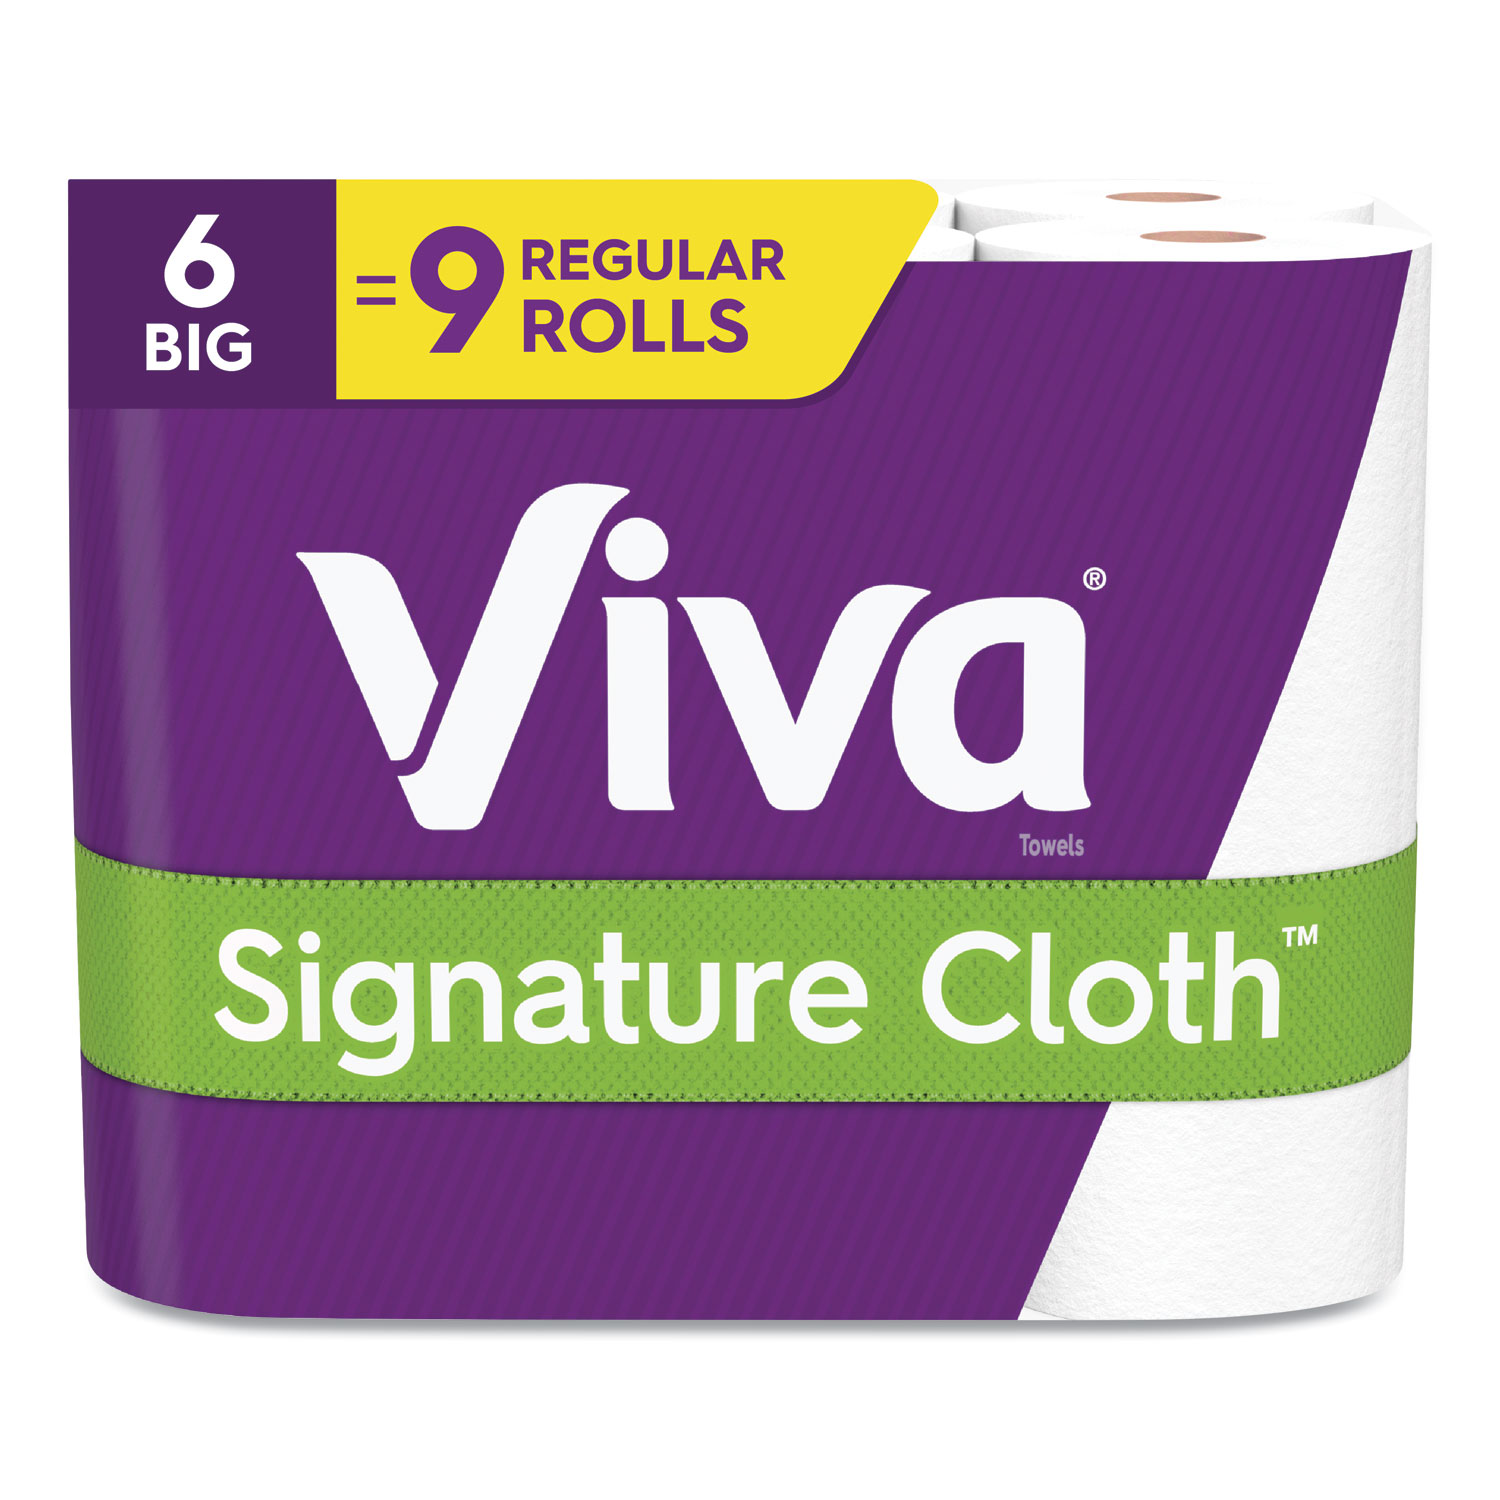  Viva 11370 Signature Cloth Choose-A-Sheet Paper Towels, 1-Ply, 11 x 5.9, White, 83 Sheets/Roll, 6 Rolls/Pack, 4 Packs/Carton (KCC49425) 